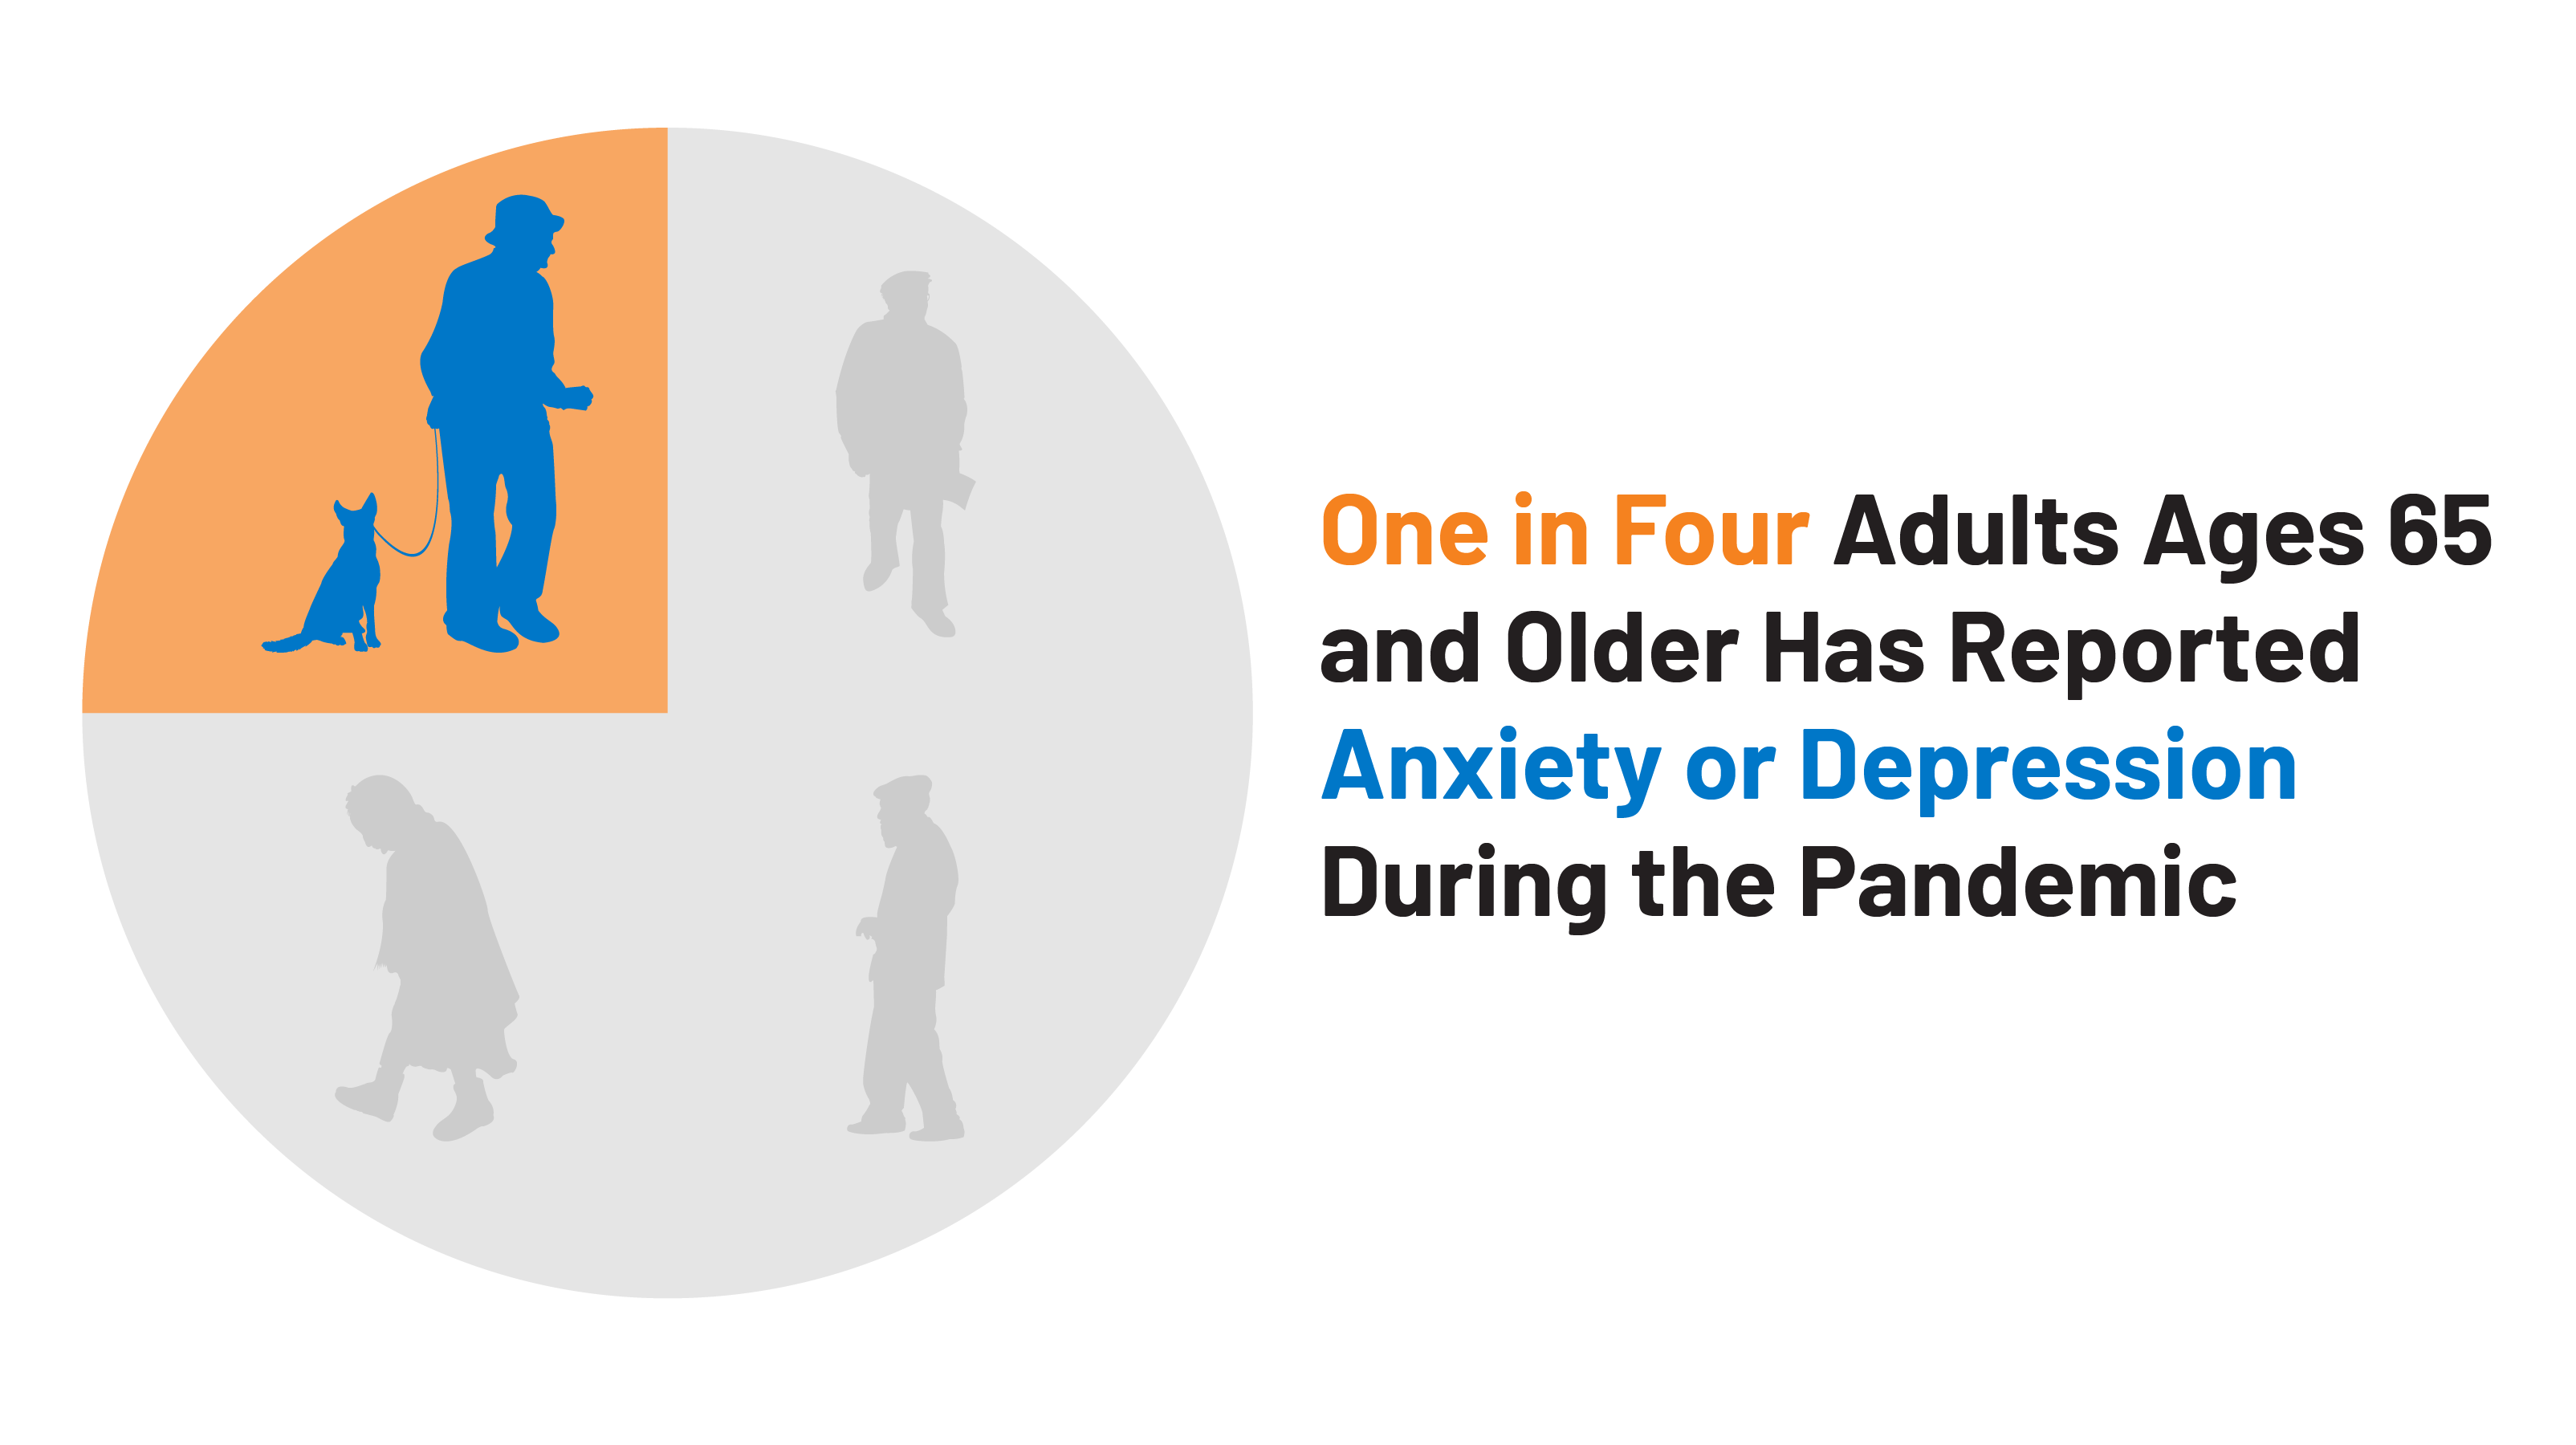 3 in 5 American adults report feeling lonely, and younger adults